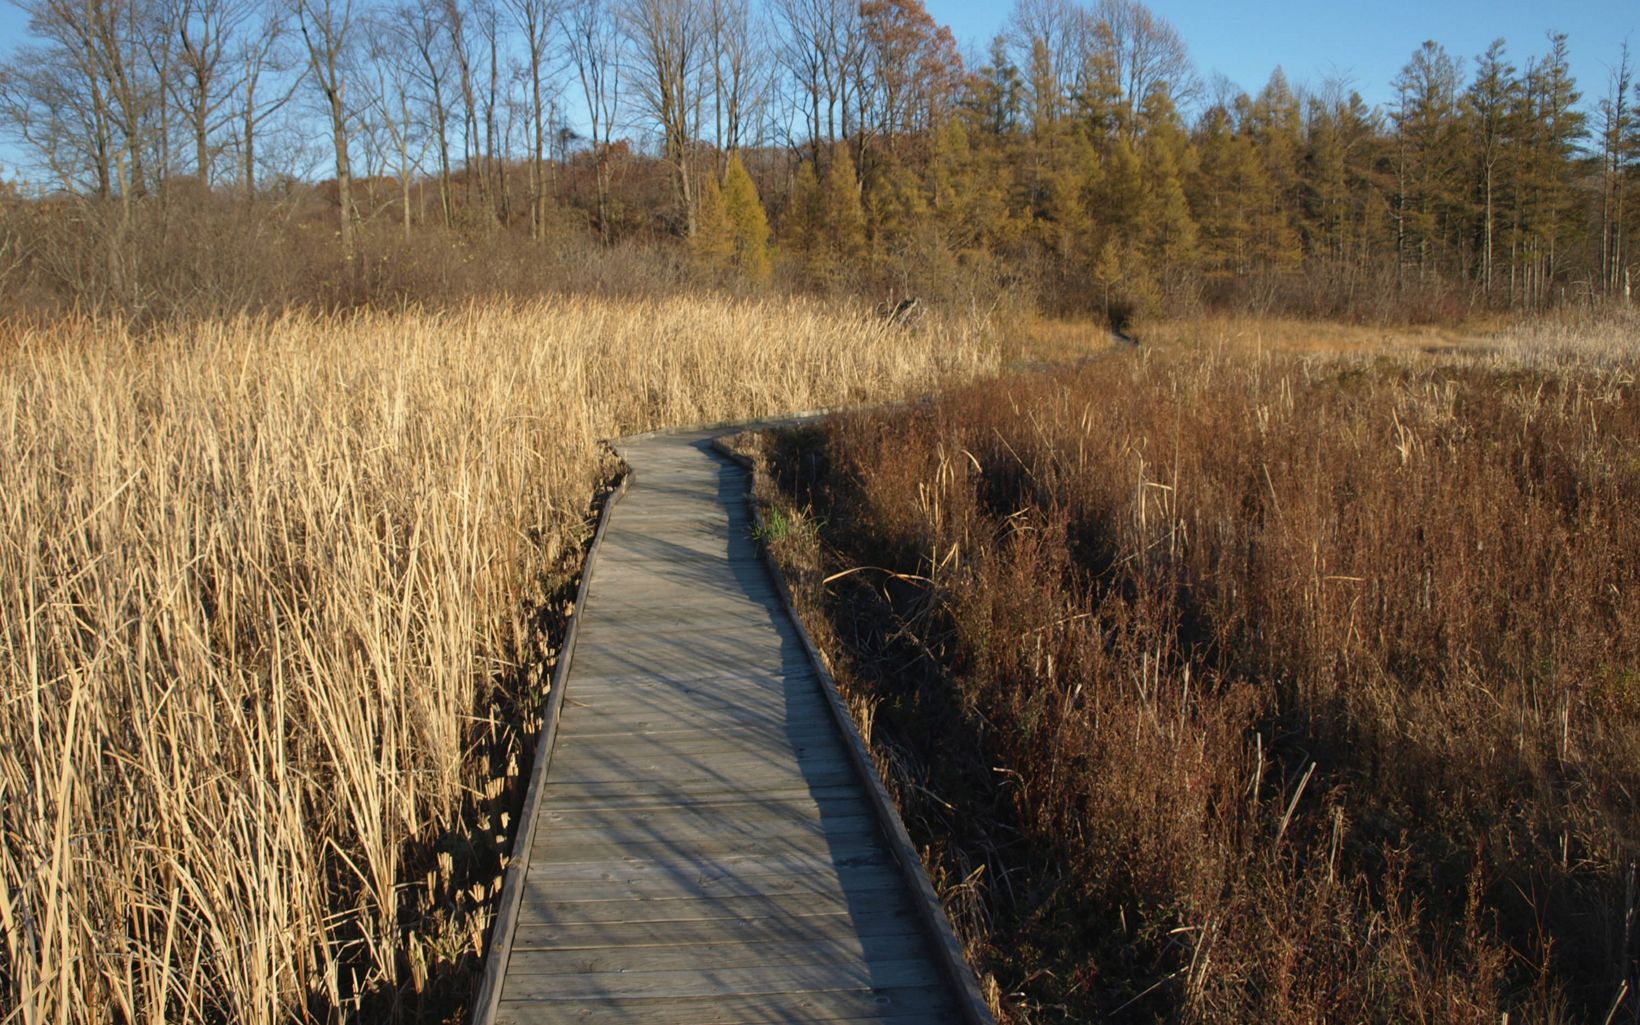 J. Arthur Herrick Fen Grasses and native plants surround the boardwalk as it winds through the wetland at J. Arthur Herrick Fen Preserve before it enters the forest. © Linda Bourassa